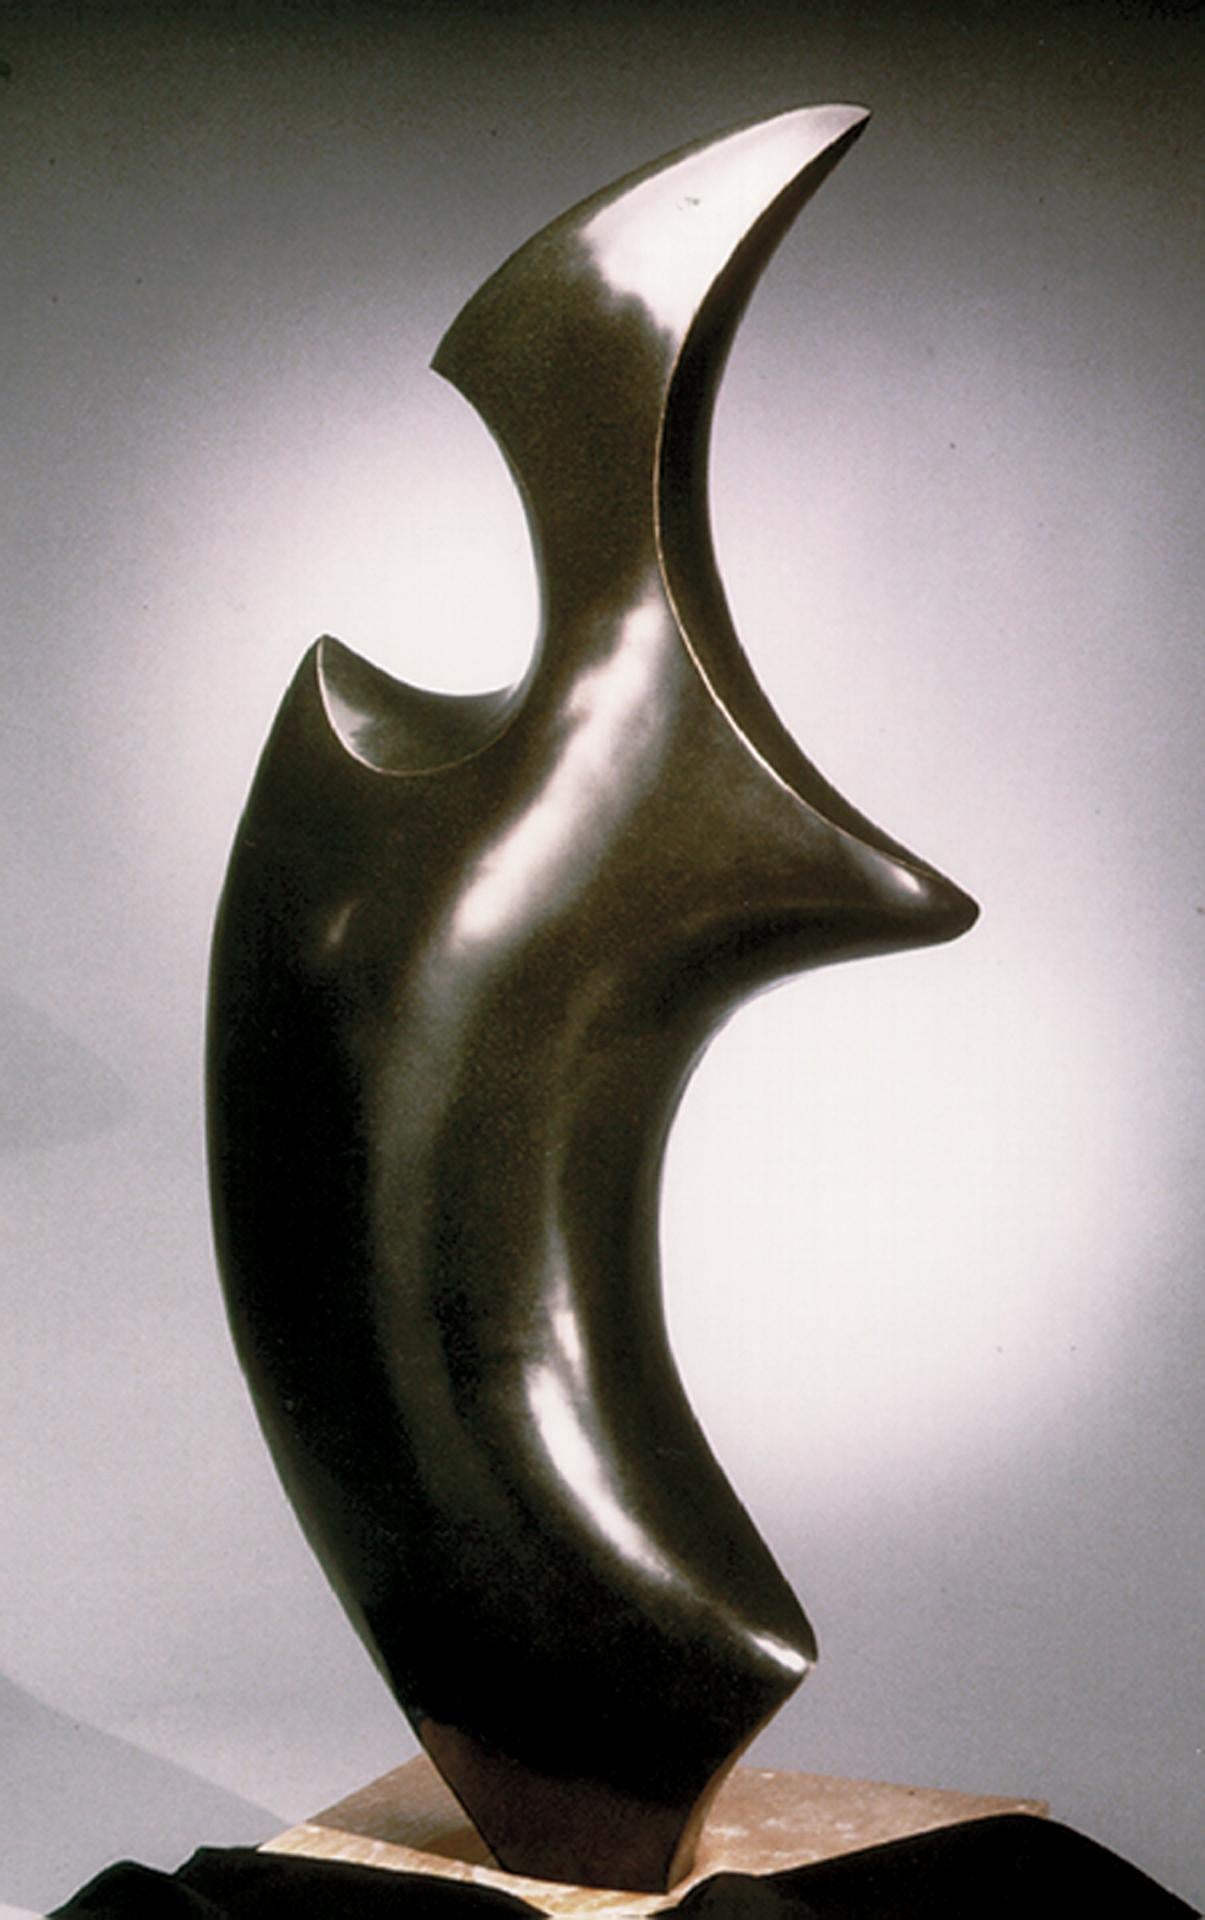 Dream Offering - Gold Abstract Sculpture by Mark Leichliter